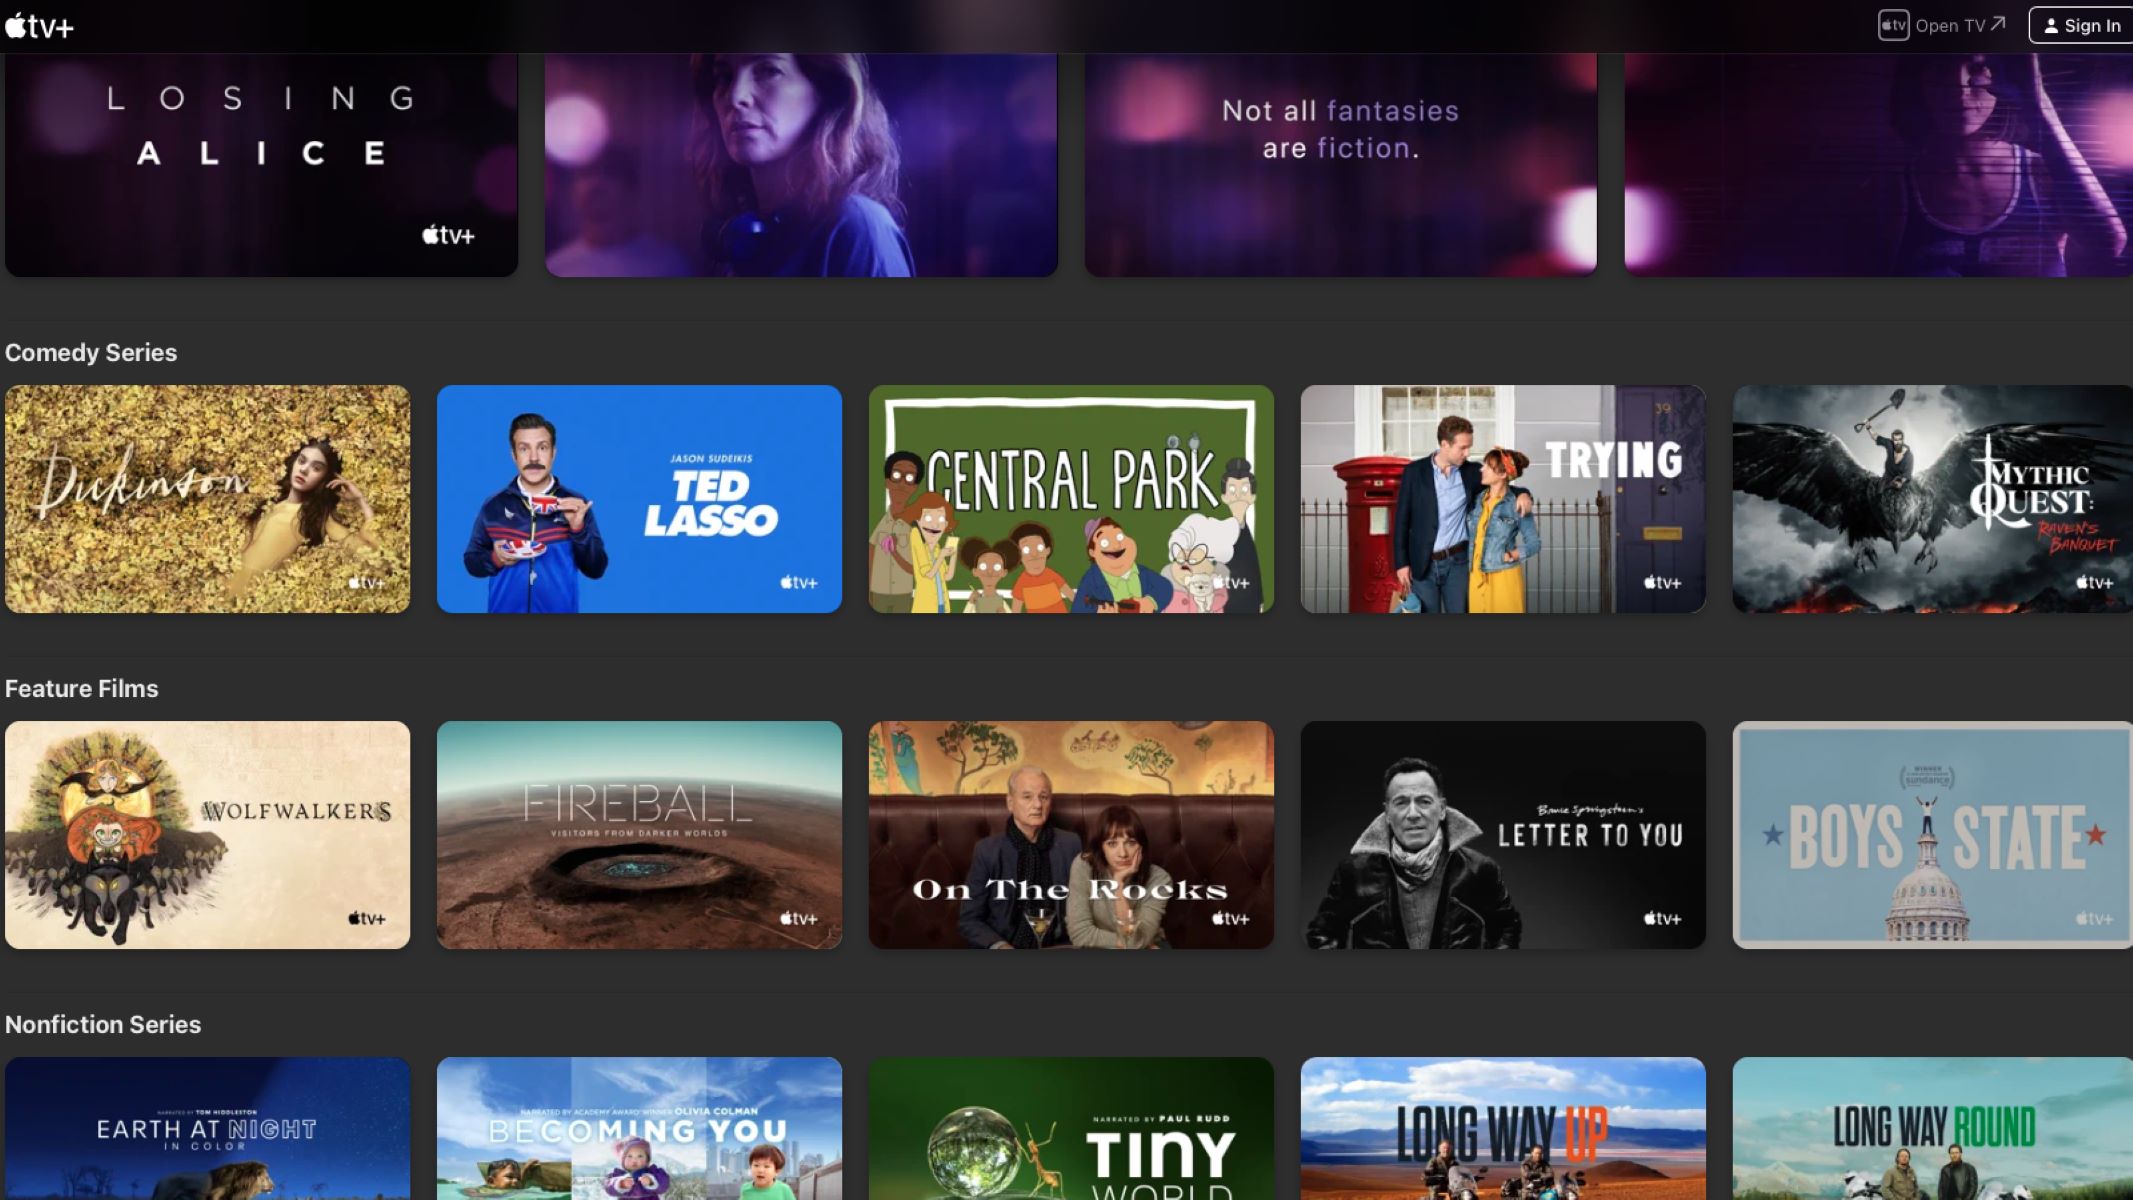 What Can You Watch On Apple TV For Free